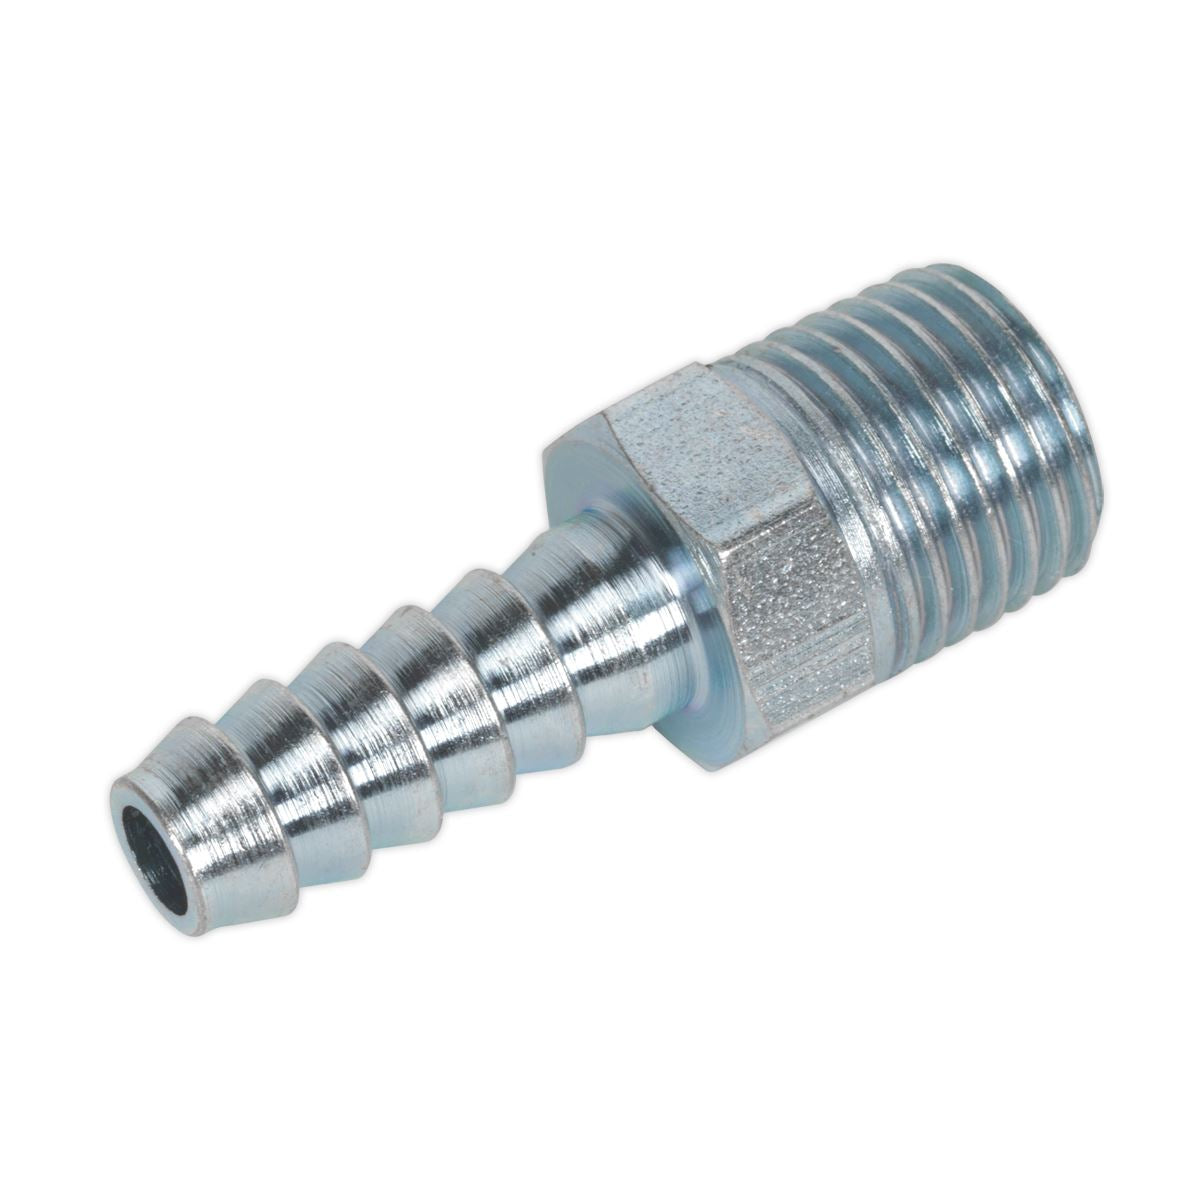 PCL Screwed Tailpiece Male 1/4"BSPT - 1/4" Hose Pack of 5